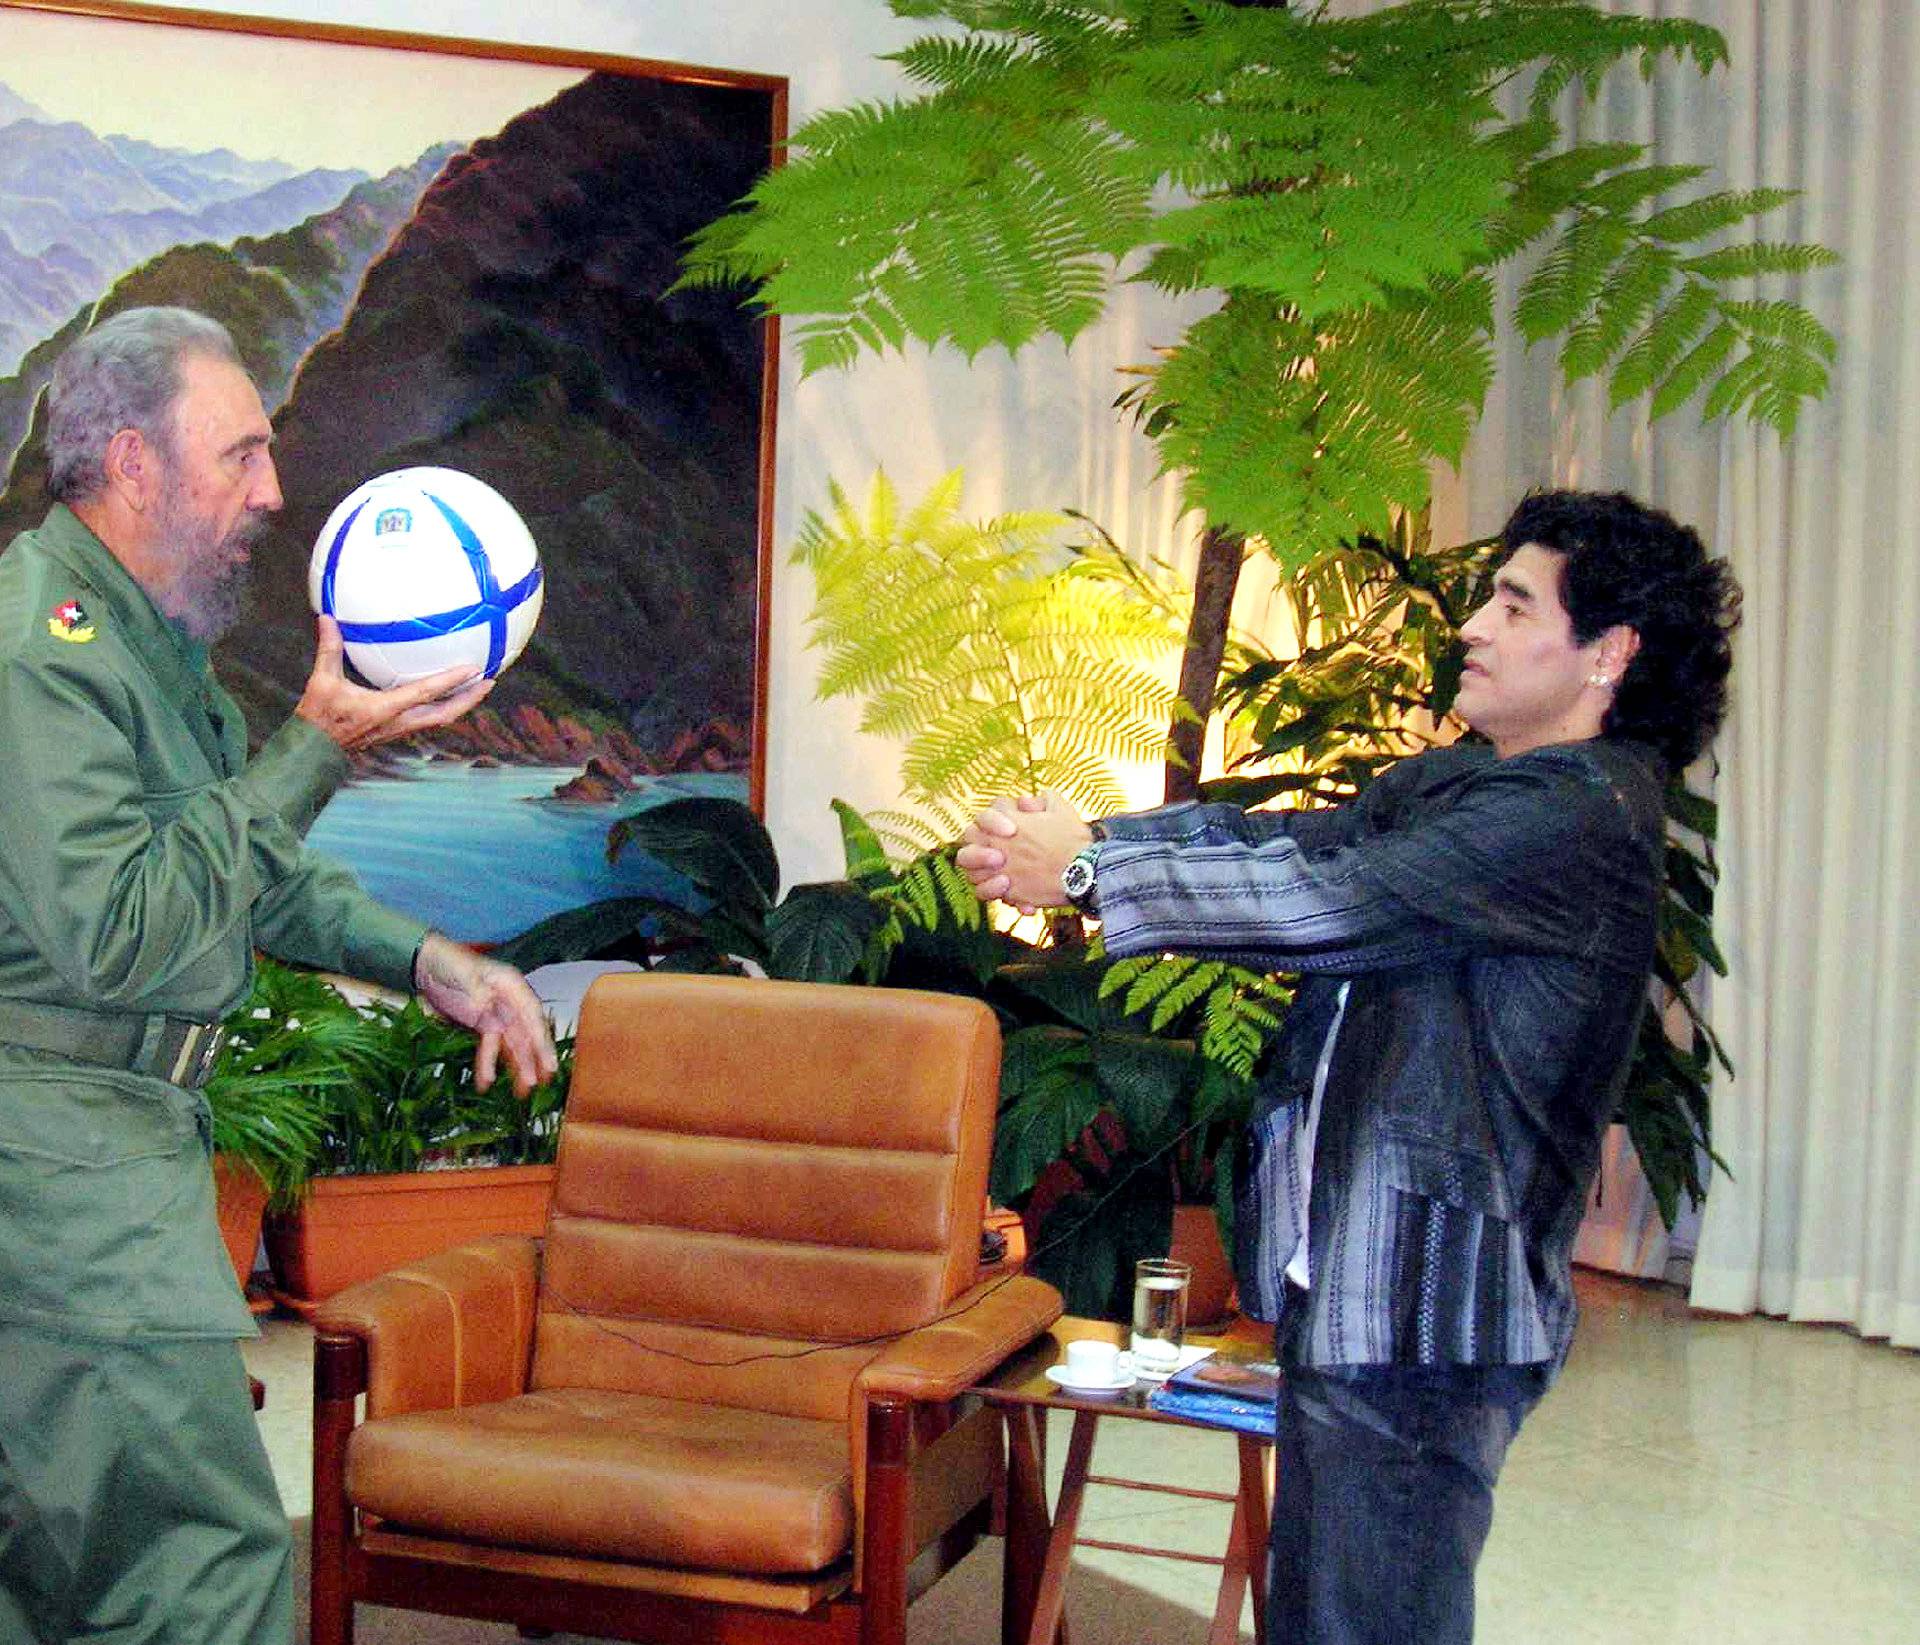 File photo of Cuban President Castro and Argentine soccer legend Maradona playing with a ball during an interview in La Havana